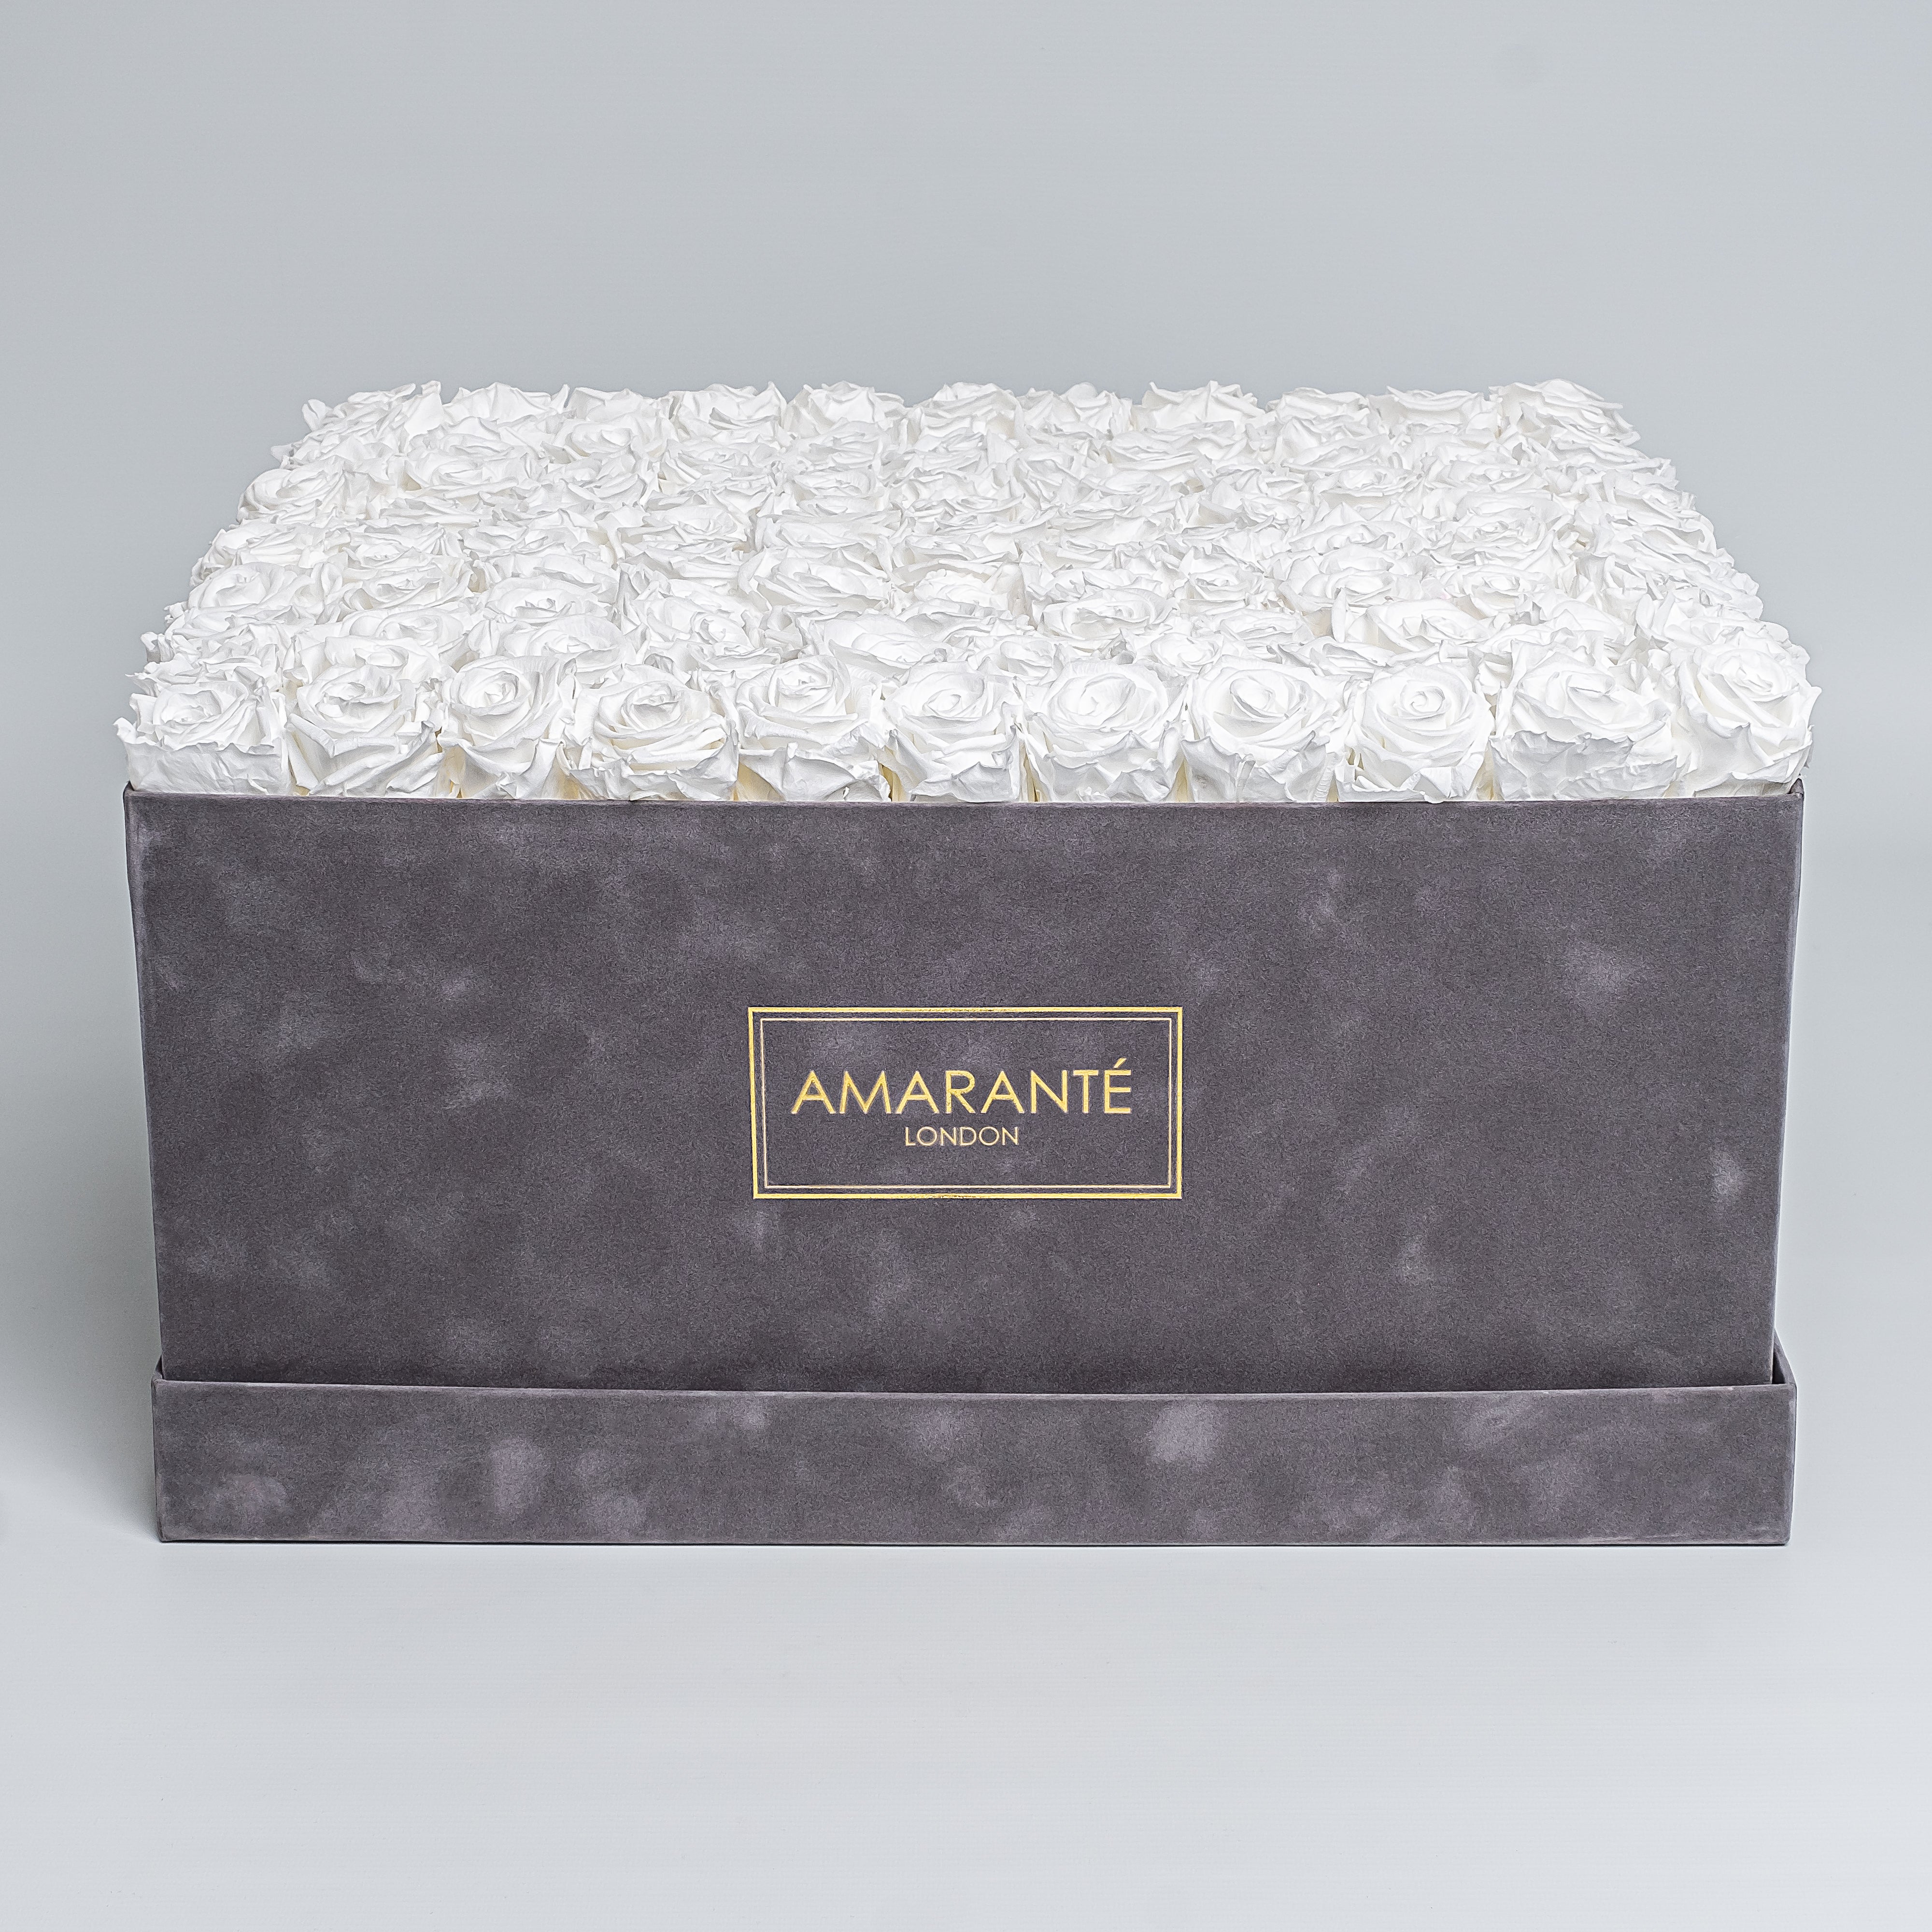 Super deluxe grey square suede rose box with 150 enchanting white infinity roses, a chic and timeless token of love - free UK delivery. Elegant rose box, 20"x20" size. Roses are also available on other 14 delicate pastel colours.